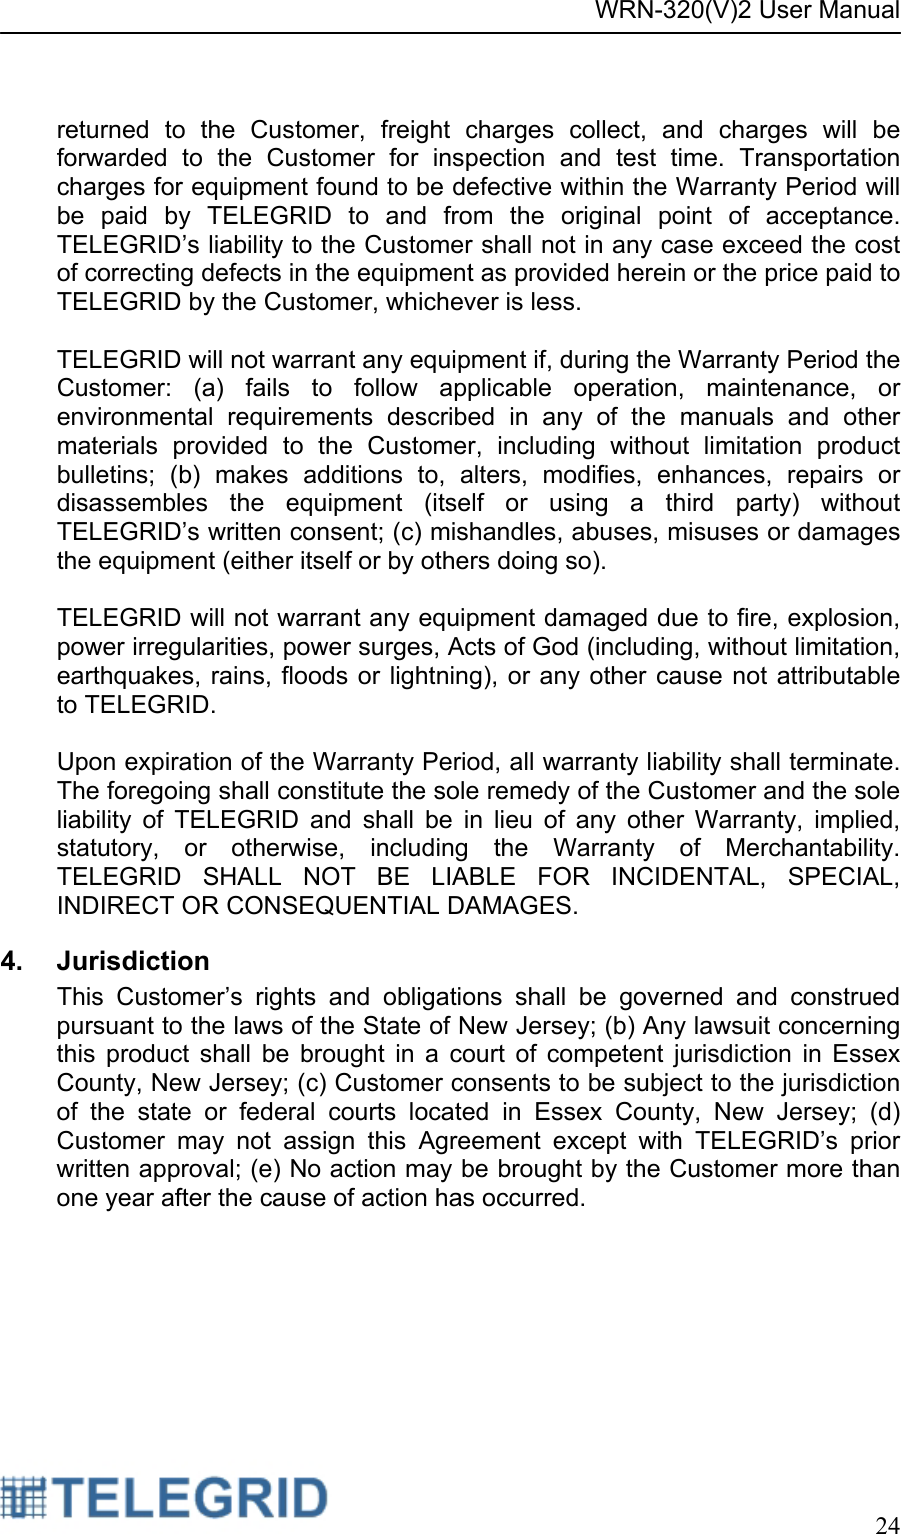 WRN-320(V)2 User Manual     24   returned to the Customer, freight charges collect, and charges will be forwarded to the Customer for inspection and test time. Transportation charges for equipment found to be defective within the Warranty Period will be paid by TELEGRID to and from the original point of acceptance.  TELEGRID’s liability to the Customer shall not in any case exceed the cost of correcting defects in the equipment as provided herein or the price paid to TELEGRID by the Customer, whichever is less.  TELEGRID will not warrant any equipment if, during the Warranty Period the Customer: (a) fails to follow applicable operation, maintenance, or environmental requirements described in any of the manuals and other materials provided to the Customer, including without limitation product bulletins; (b) makes additions to, alters, modifies, enhances, repairs or disassembles the equipment (itself or using a third party) without TELEGRID’s written consent; (c) mishandles, abuses, misuses or damages the equipment (either itself or by others doing so).  TELEGRID will not warrant any equipment damaged due to fire, explosion, power irregularities, power surges, Acts of God (including, without limitation, earthquakes, rains, floods or lightning), or any other cause not attributable to TELEGRID.  Upon expiration of the Warranty Period, all warranty liability shall terminate. The foregoing shall constitute the sole remedy of the Customer and the sole liability of TELEGRID and shall be in lieu of any other Warranty, implied, statutory, or otherwise, including the Warranty of Merchantability. TELEGRID SHALL NOT BE LIABLE FOR INCIDENTAL, SPECIAL, INDIRECT OR CONSEQUENTIAL DAMAGES. 4. Jurisdiction This Customer’s rights and obligations shall be governed and construed pursuant to the laws of the State of New Jersey; (b) Any lawsuit concerning this product shall be brought in a court of competent jurisdiction in Essex County, New Jersey; (c) Customer consents to be subject to the jurisdiction of the state or federal courts located in Essex County, New Jersey; (d) Customer may not assign this Agreement except with TELEGRID’s prior written approval; (e) No action may be brought by the Customer more than one year after the cause of action has occurred. 